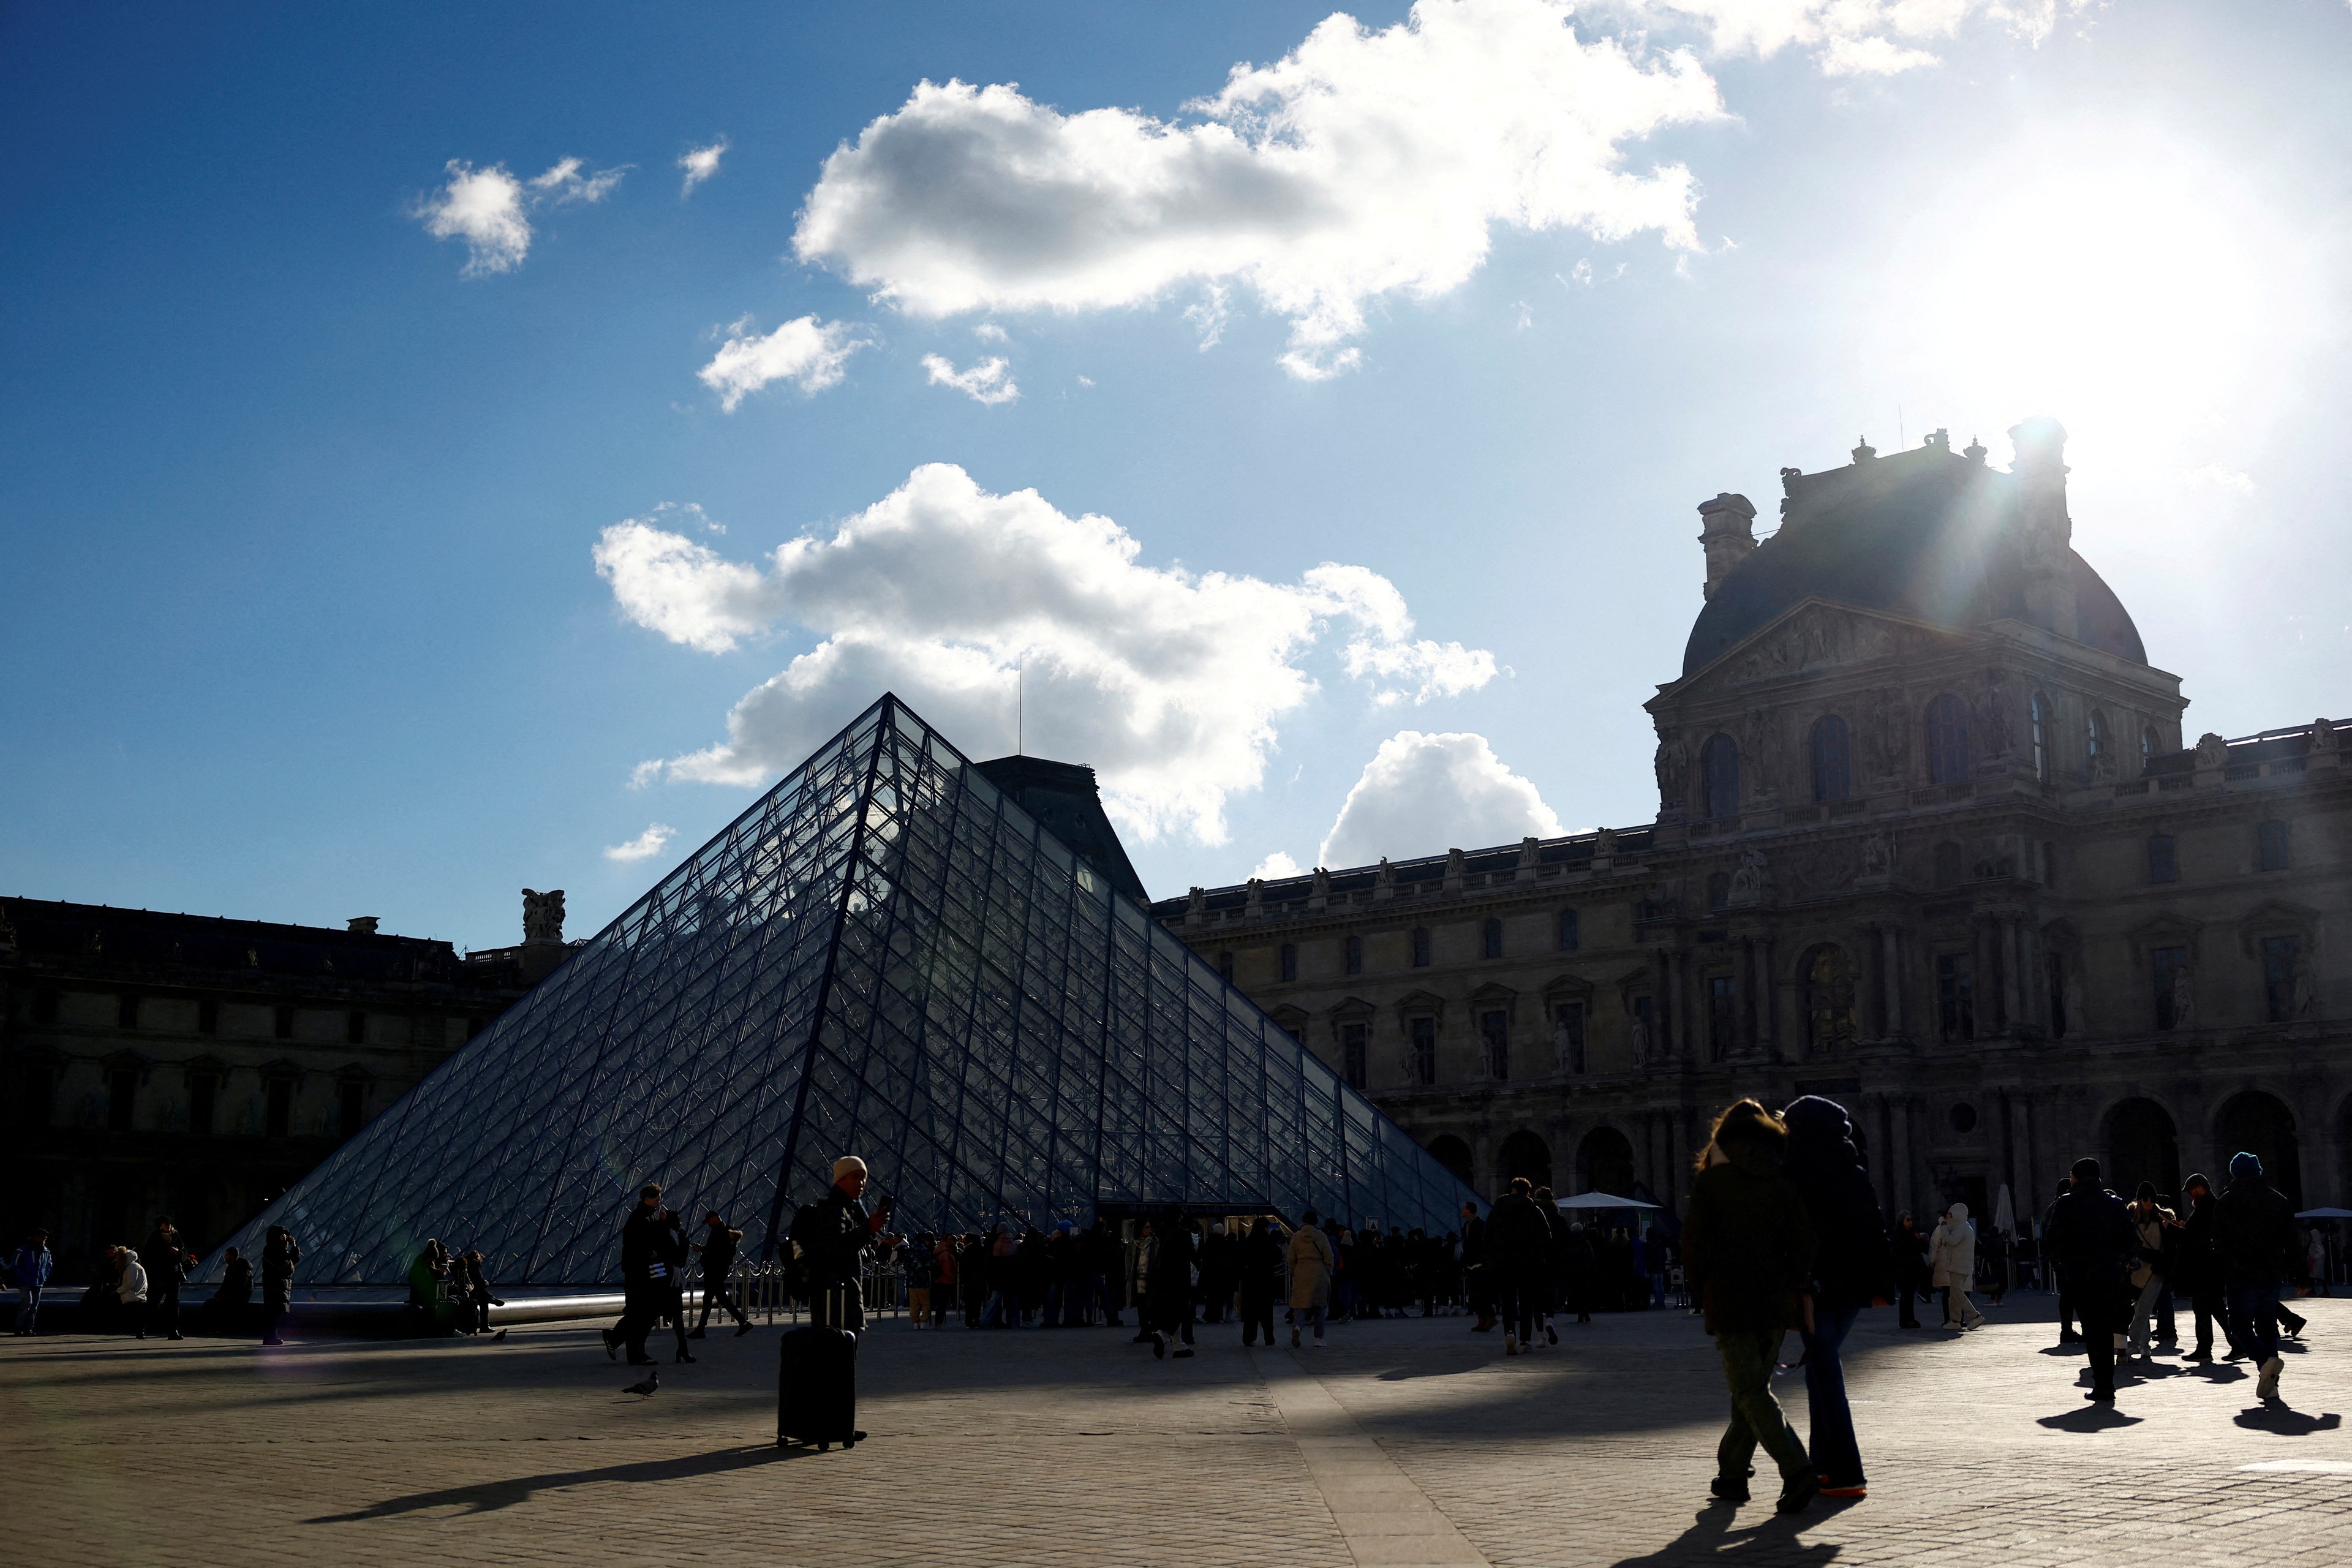 FILE PHOTO: Tourists walk past the glass Pyramid of the Louvre Museum in Paris, France, January 15, 2024. REUTERS/Sarah Meyssonnier/File Photo